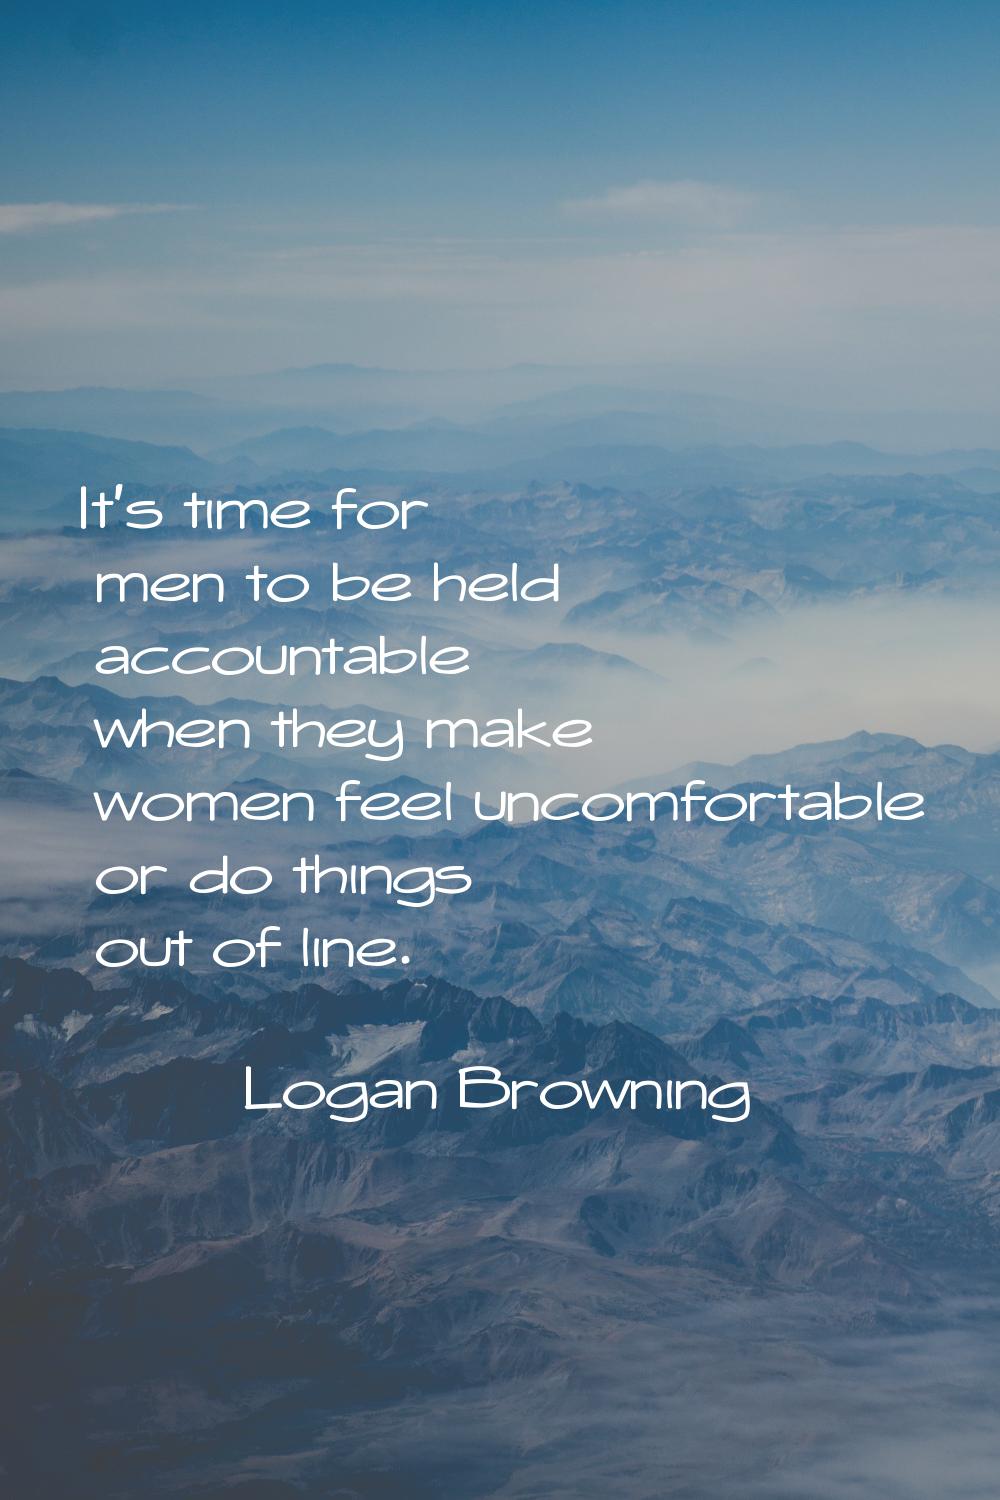 It's time for men to be held accountable when they make women feel uncomfortable or do things out o